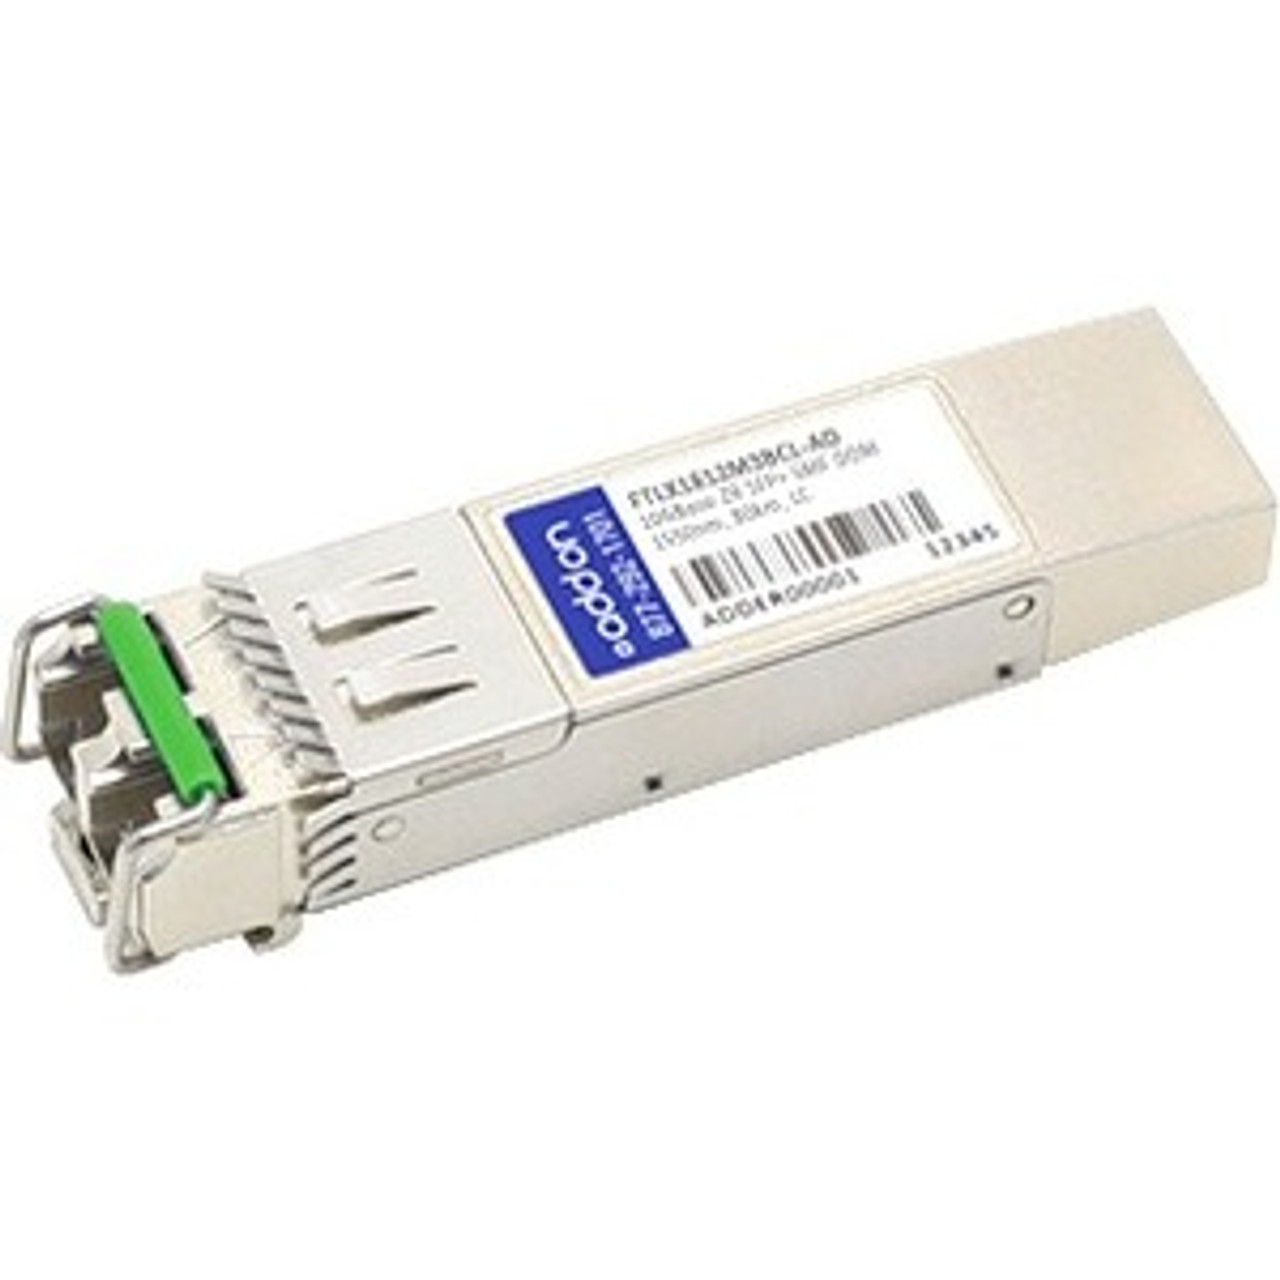 FTLX1812M3BCL-AO AddOn 10Gbps 10GBase-ZR Single-mode Fiber 80km 1550nm Duplex LC Connector XFP Transceiver Module for Finisar Compatible